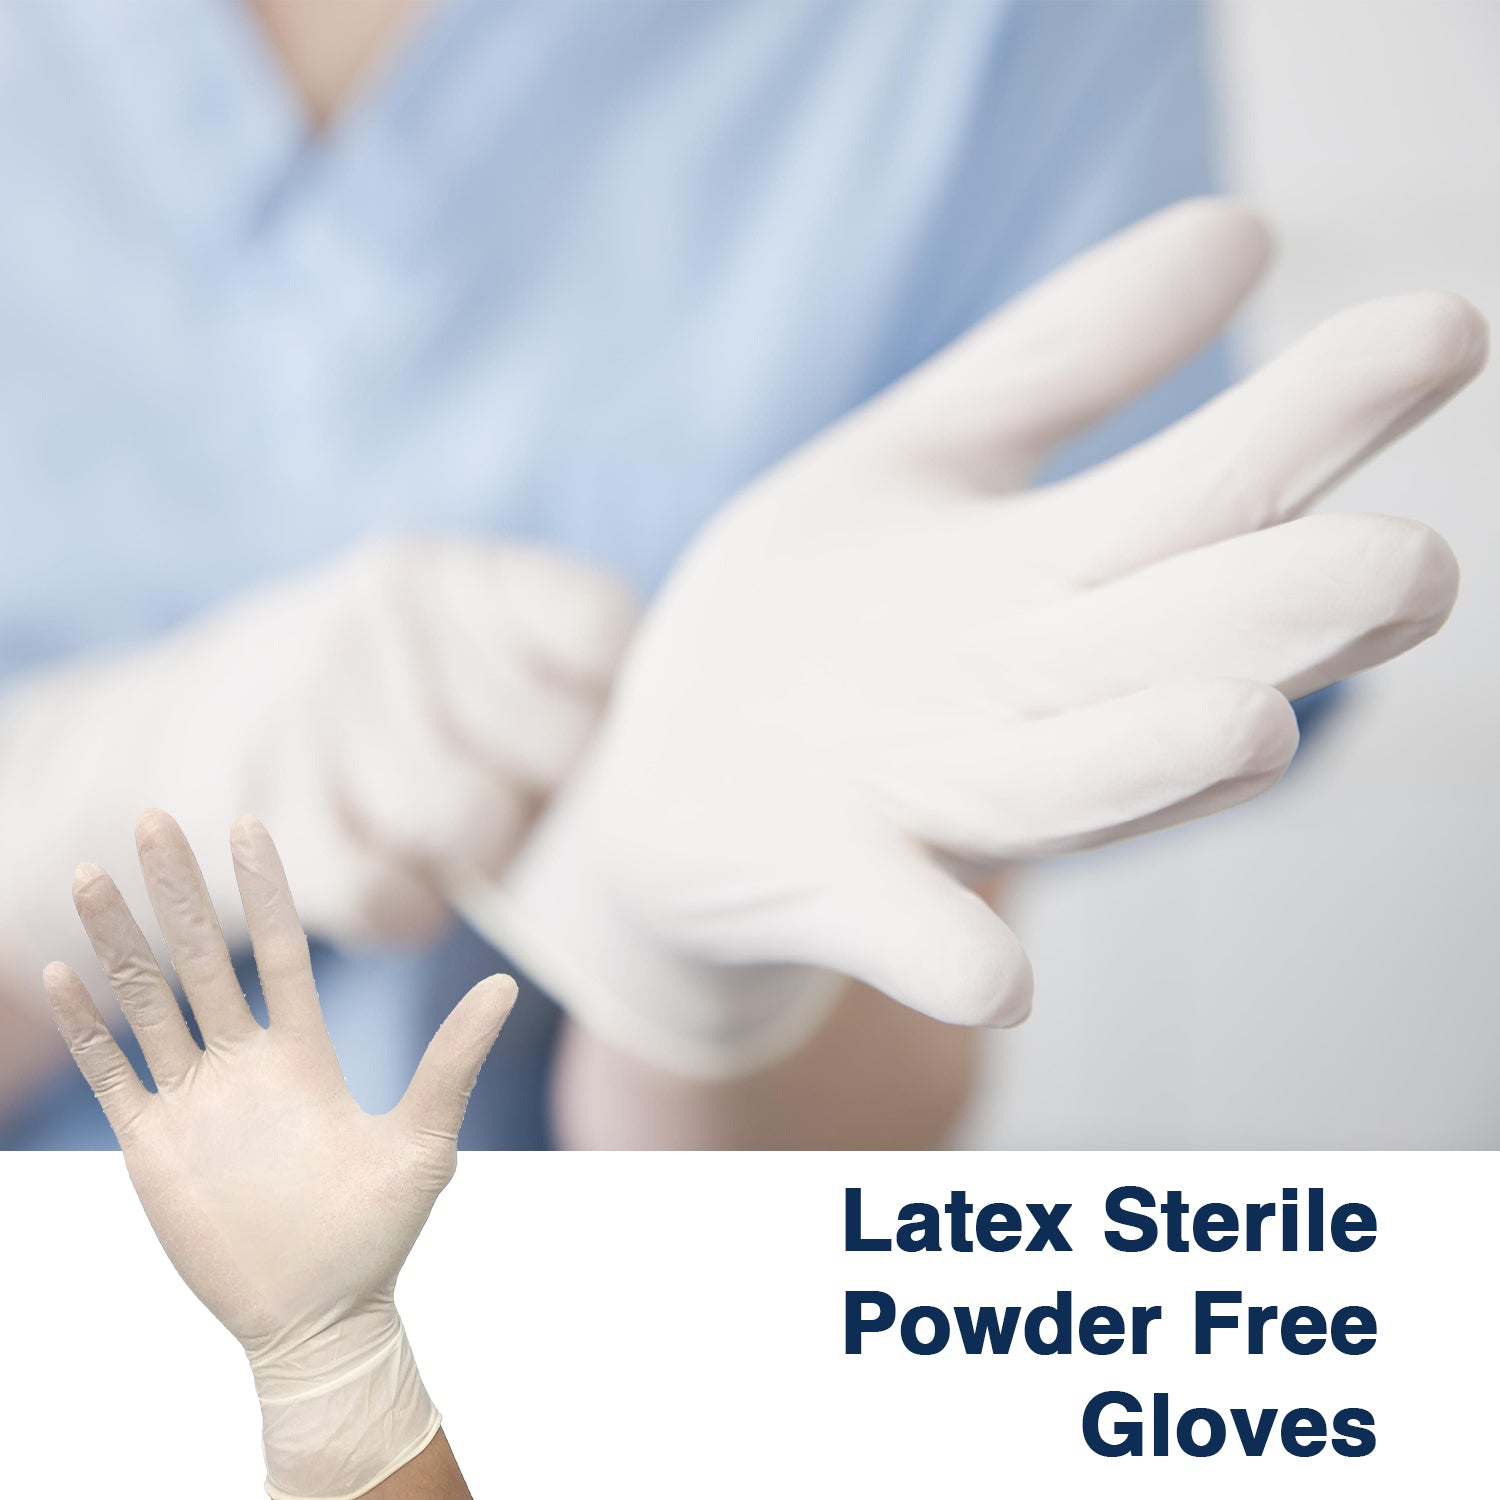 Premier Latex Sterile Powder Free Gloves | Small | Pack of 50 pairs (6)